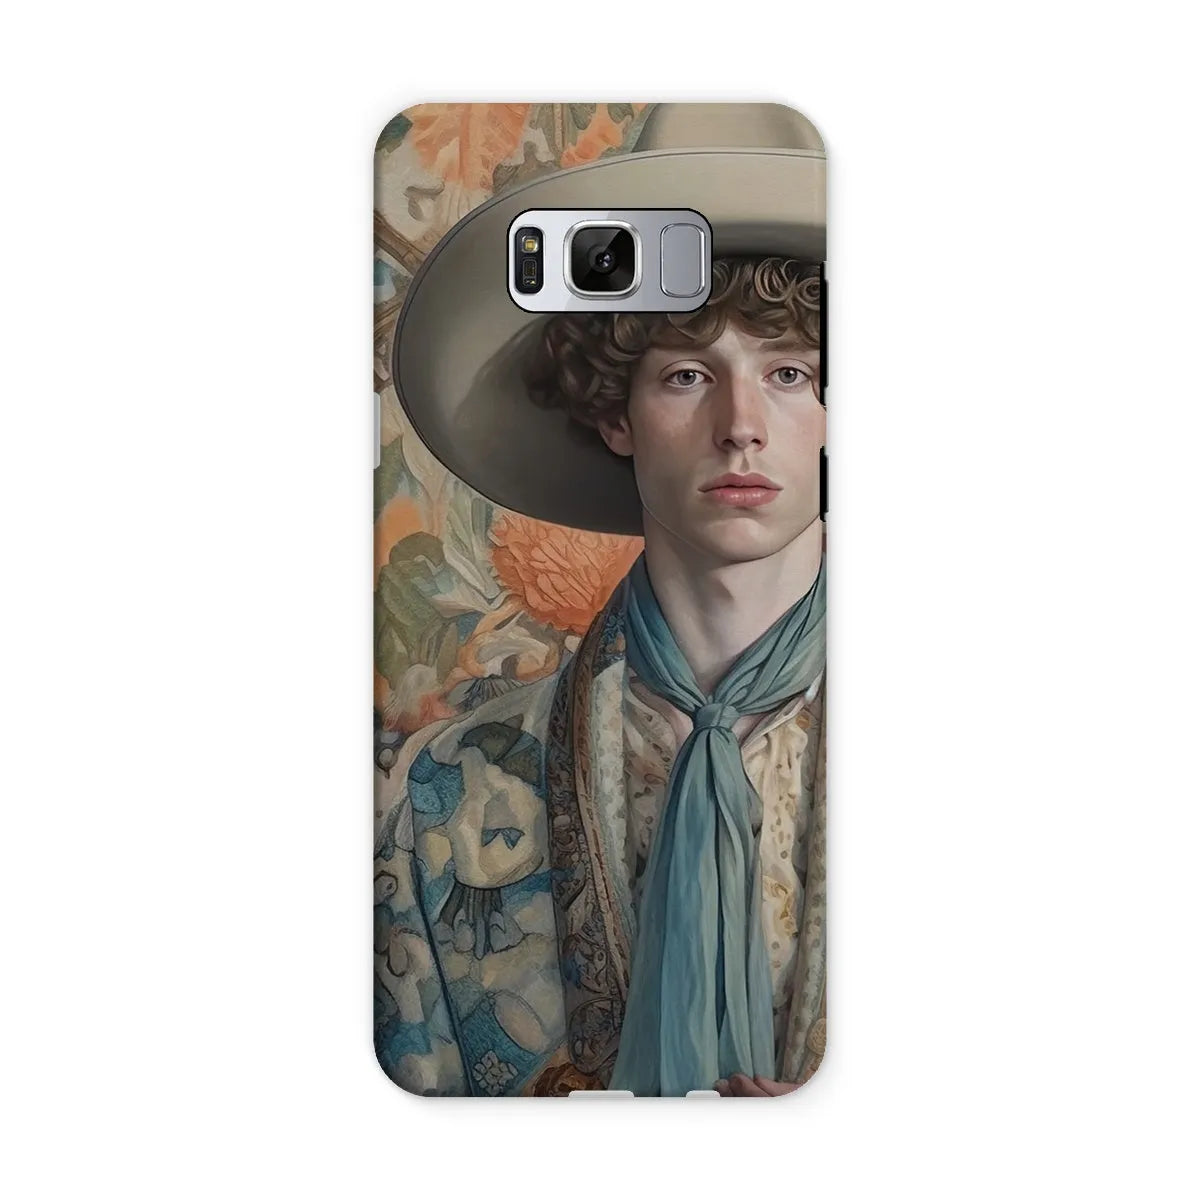 Theodore The Gay Cowboy - Dandy Gay Men Art Phone Case - Samsung Galaxy S8 / Matte - Mobile Phone Cases - Aesthetic Art